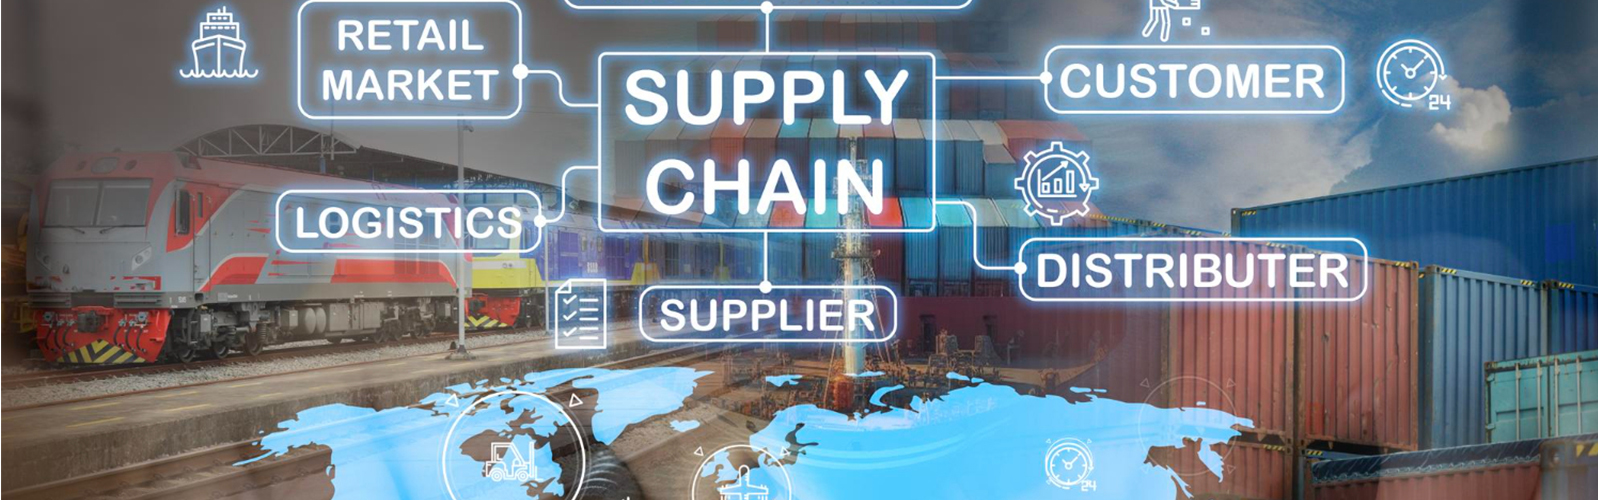 VSPGSB - Operations & Supply Chain